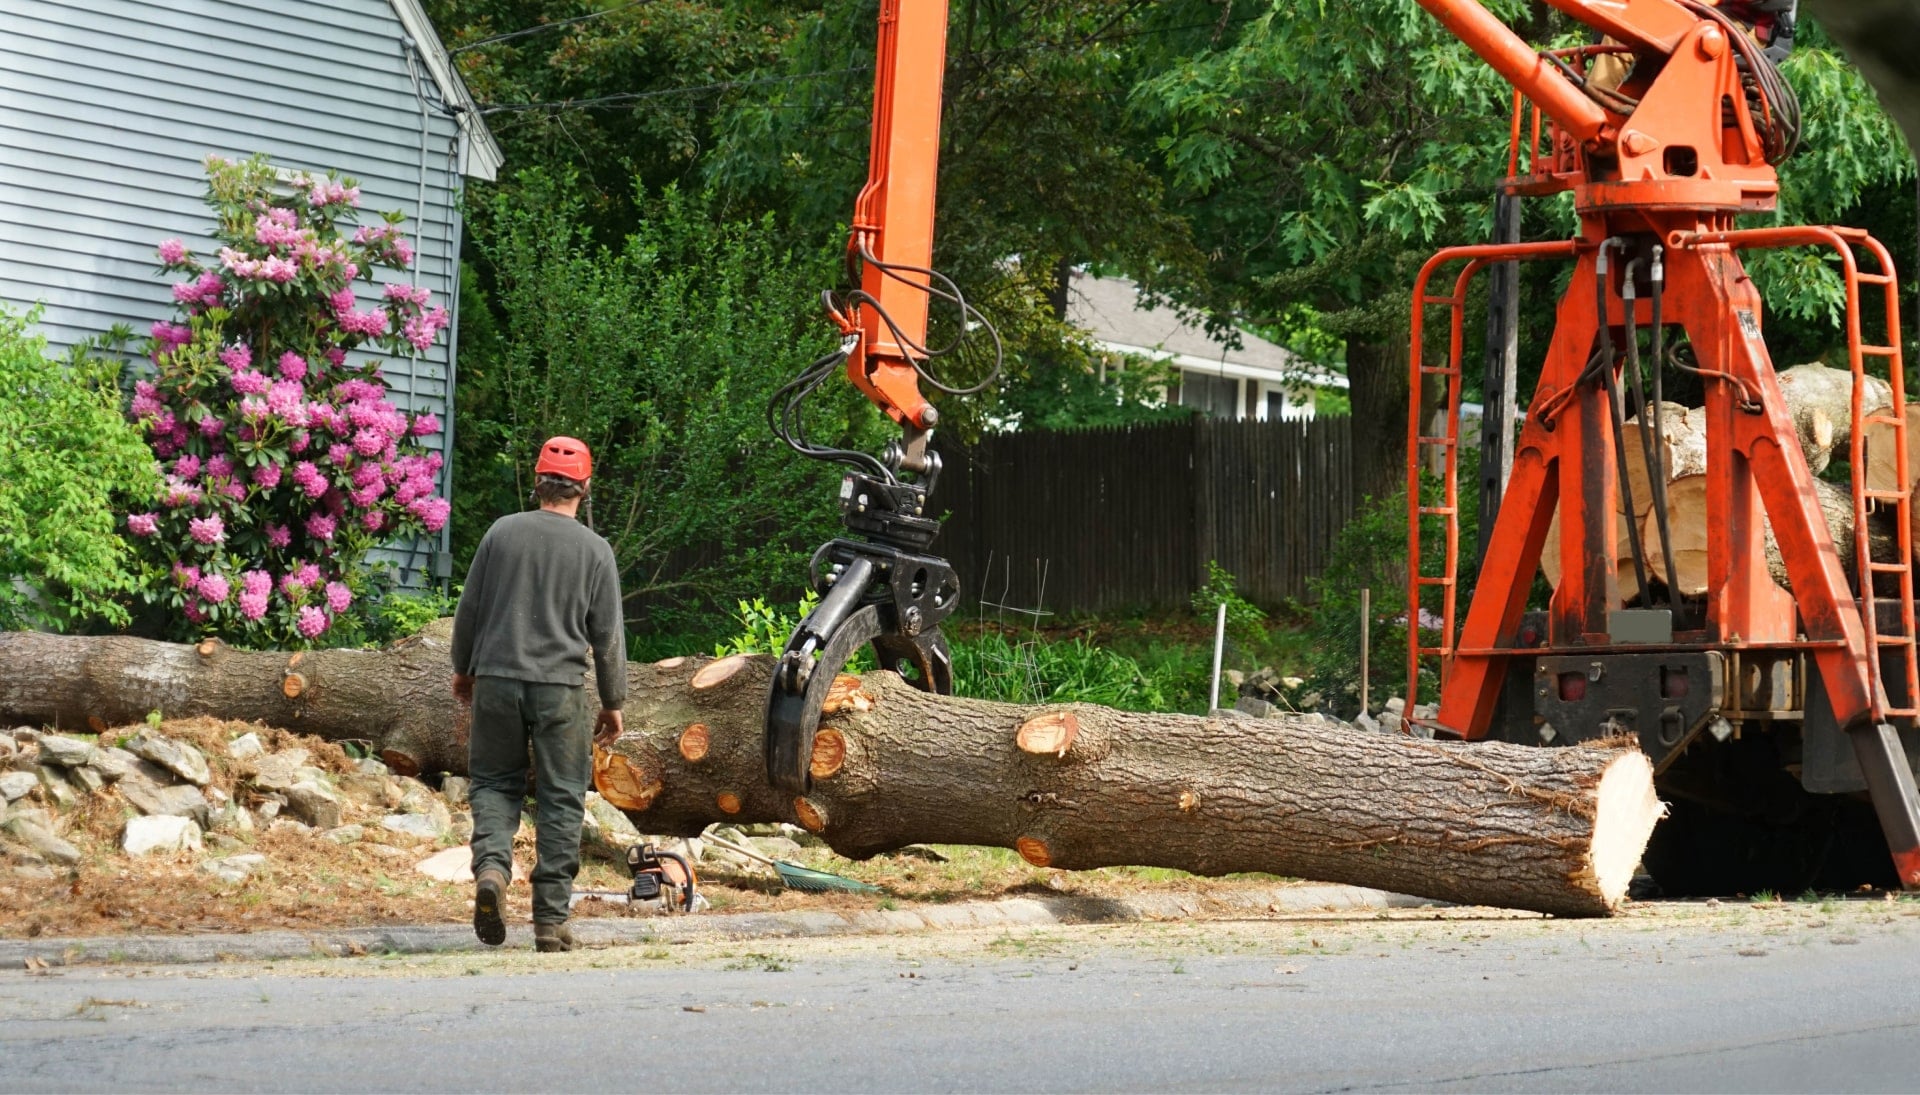 A tree stump has fallen and needs tree removal services in Gainesville, FL.